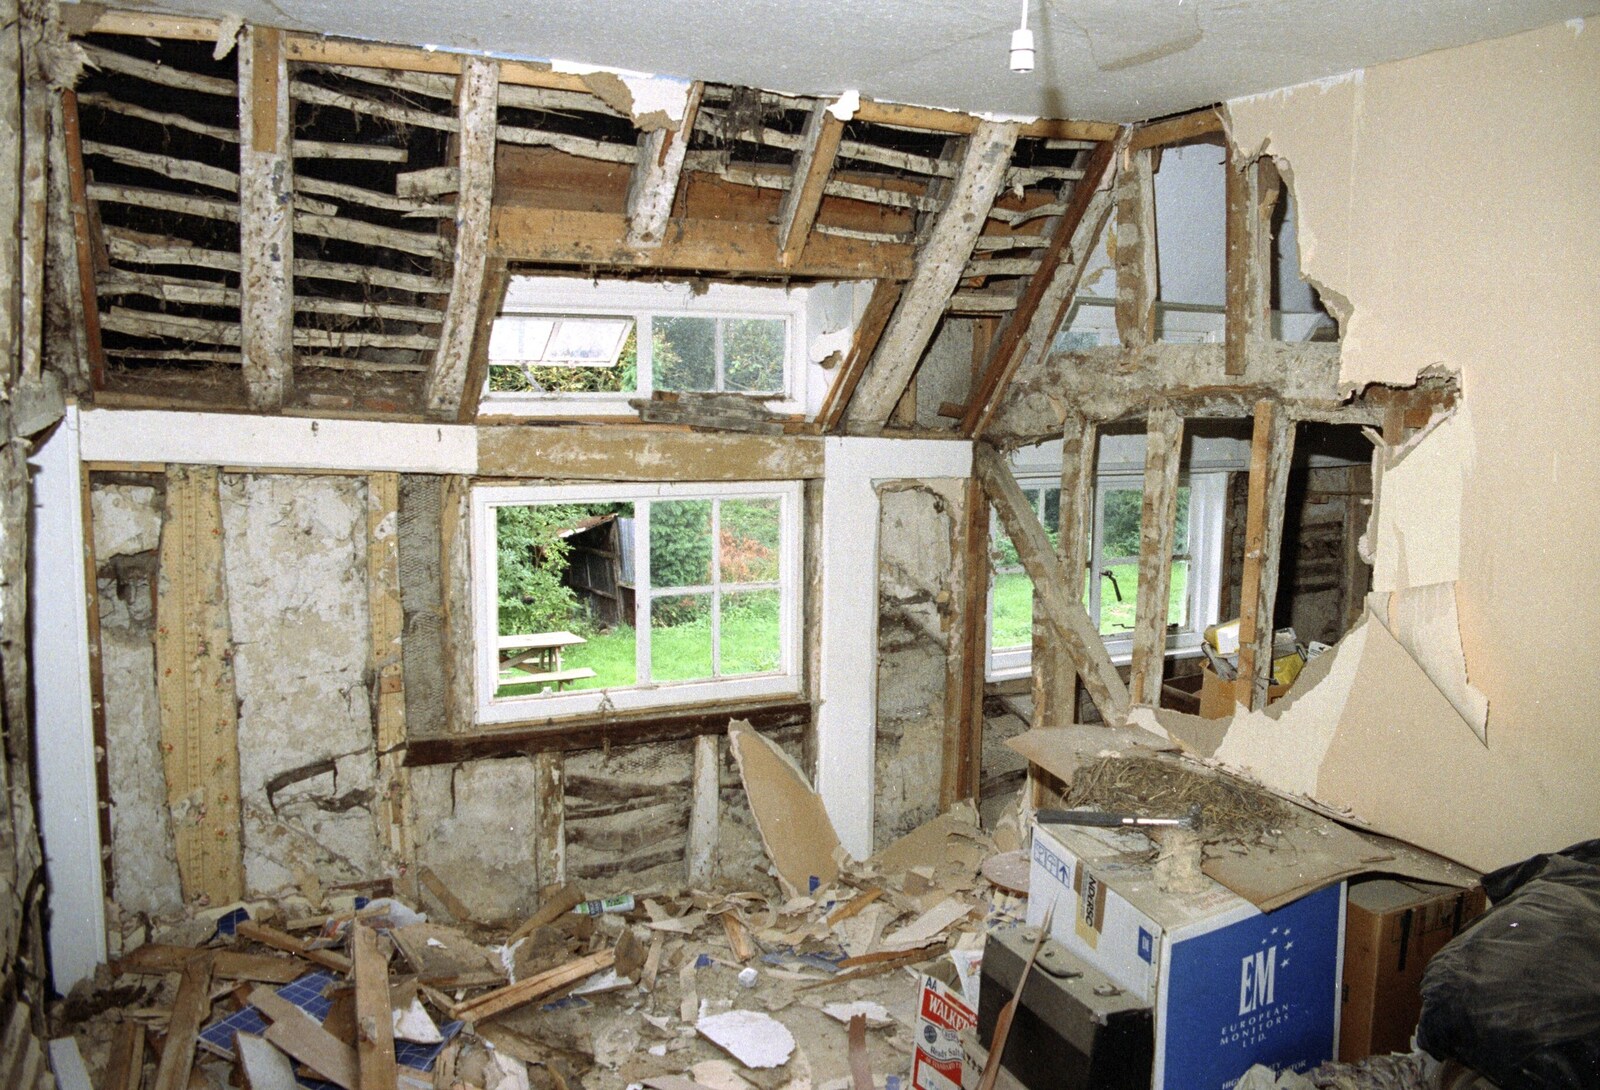 The bedroom is started on from Bedroom Demolition, Brome, Suffolk - 15th May 1995